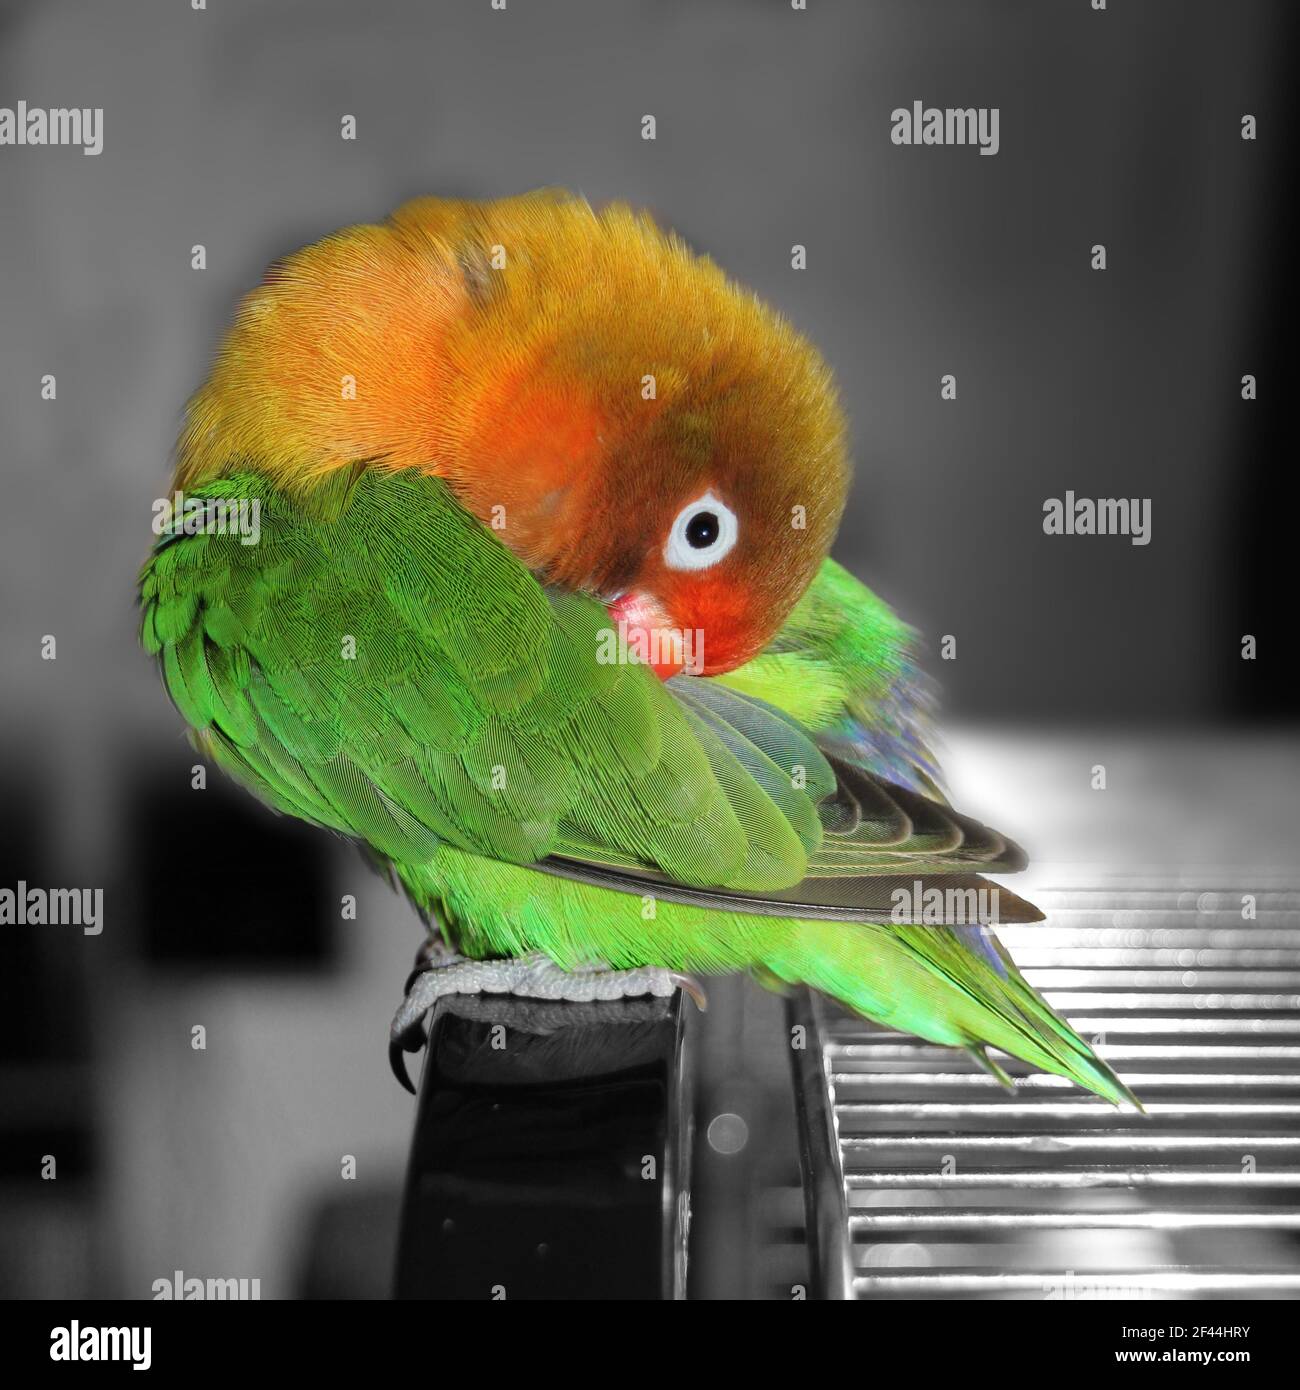 A fisheri's lovebird a cute colorful small parrot Stock Photo